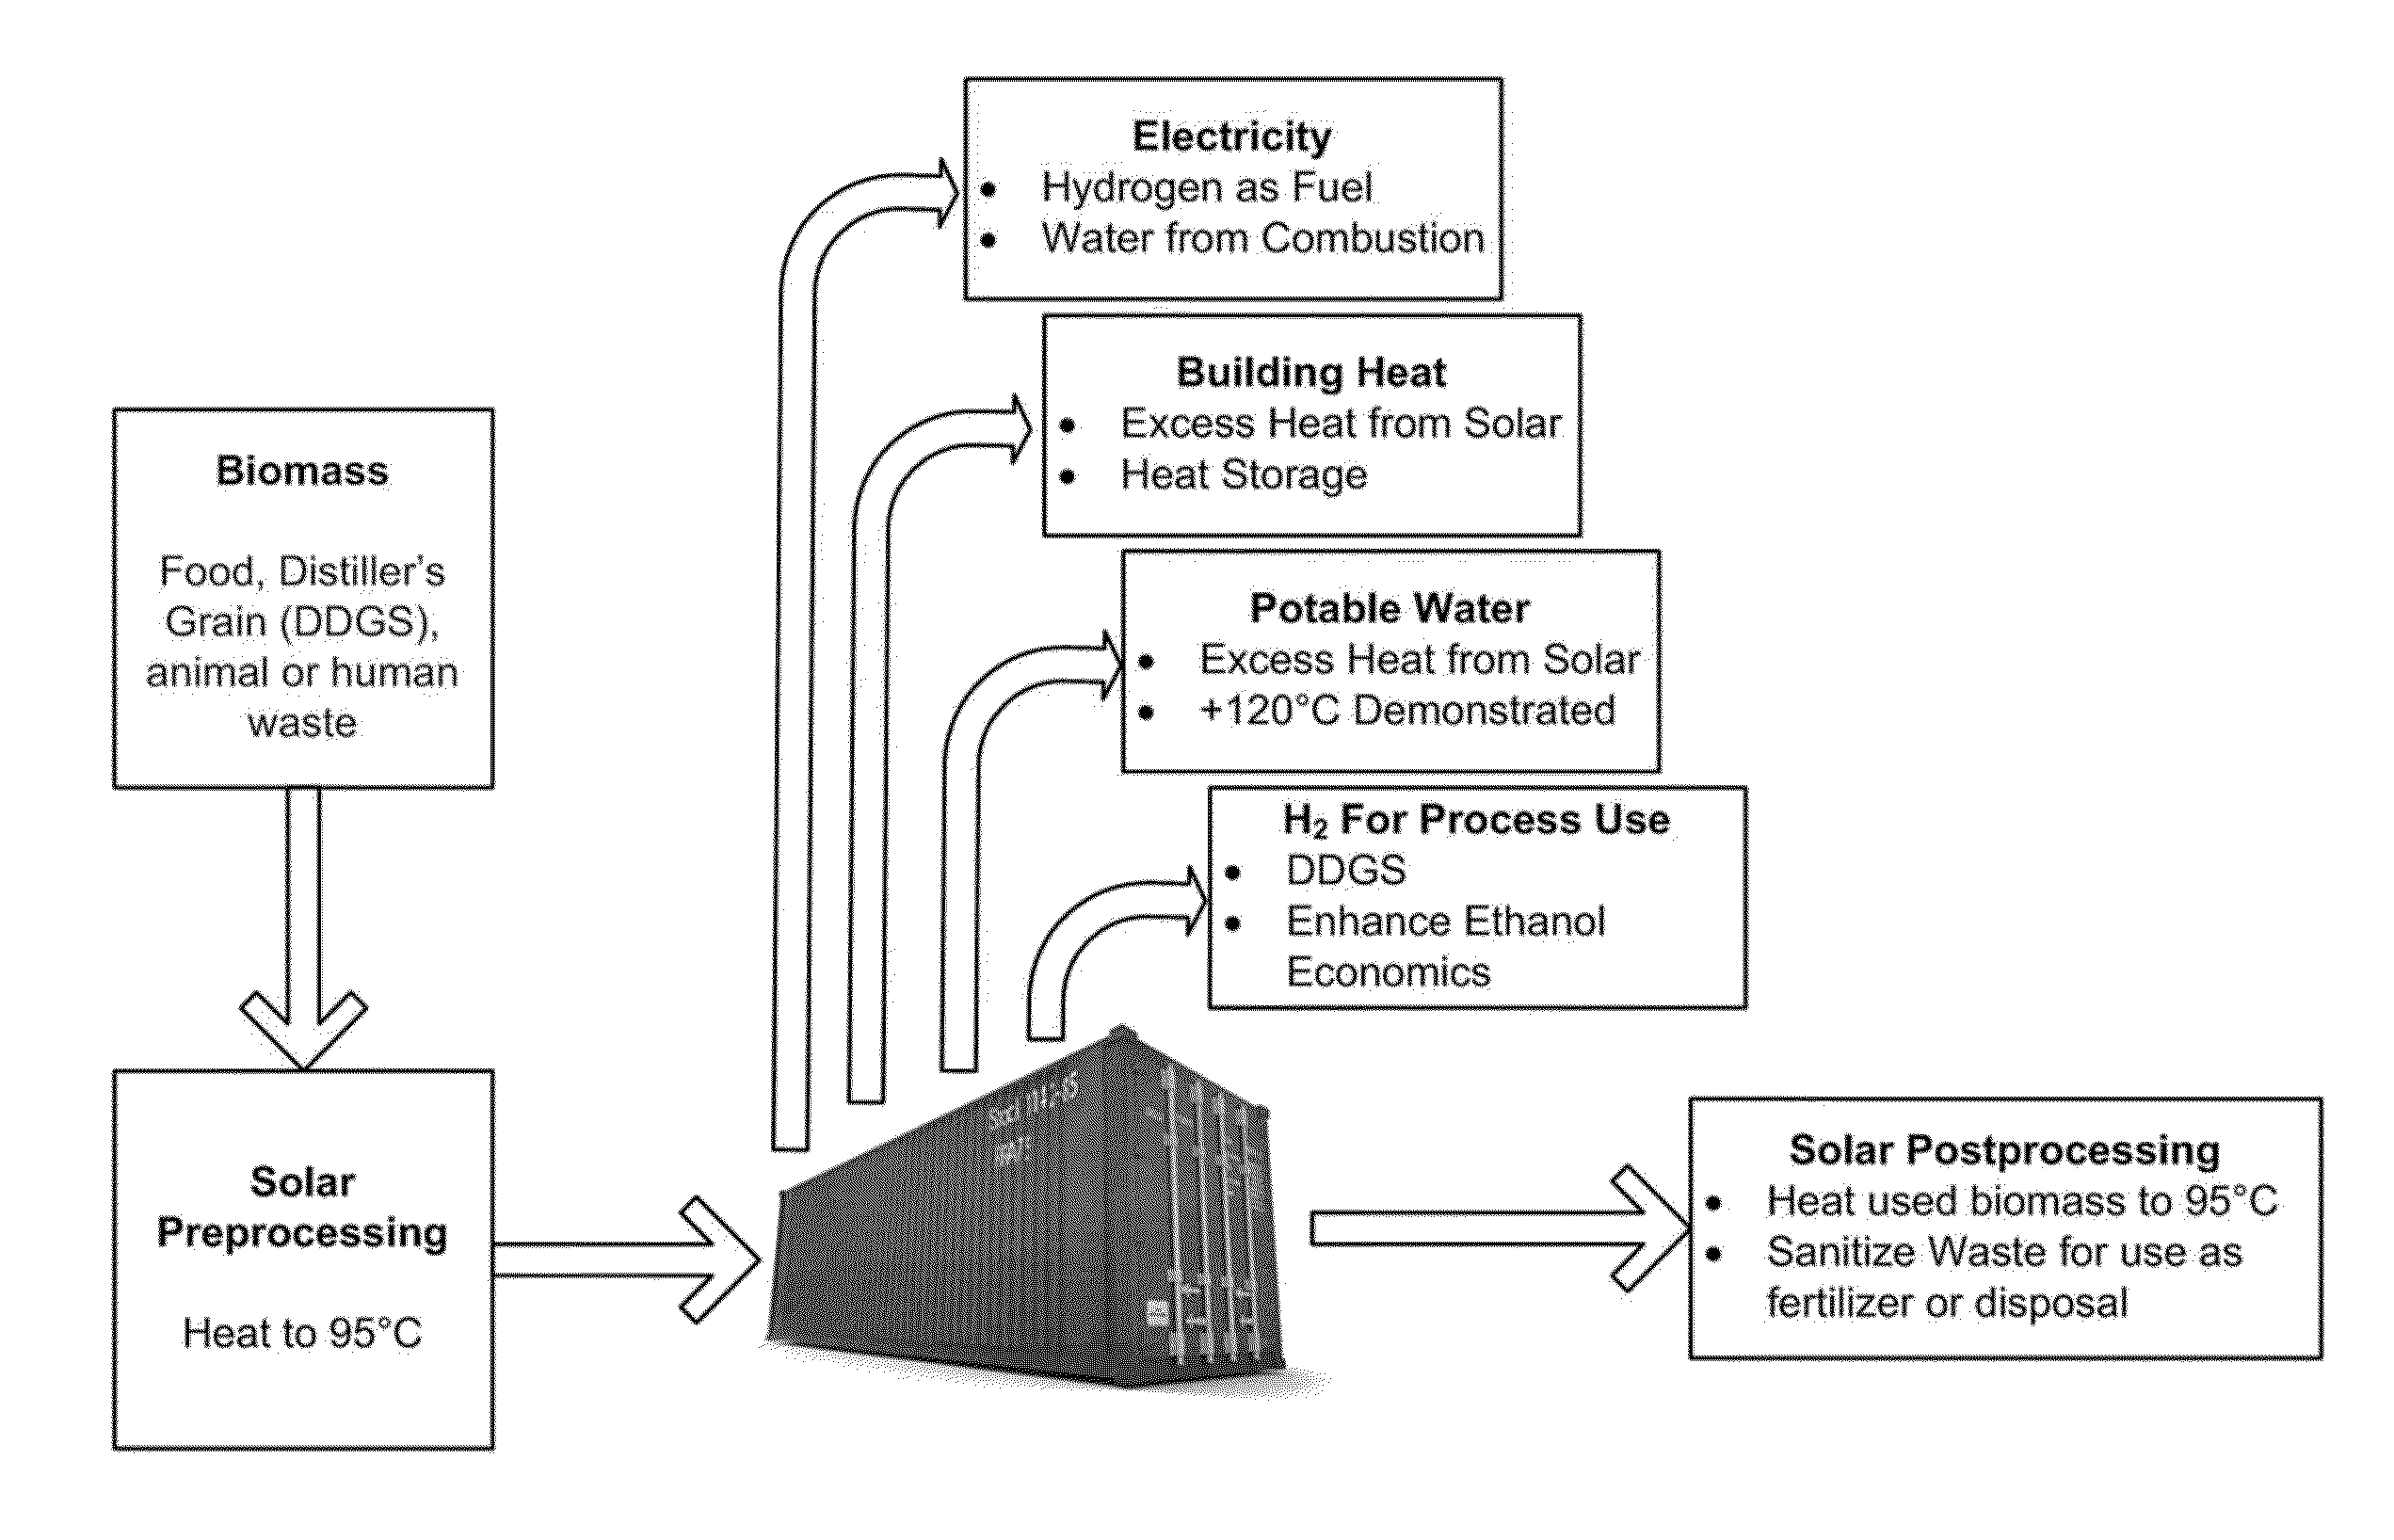 Production of hydrogen using an anaerobic biological process